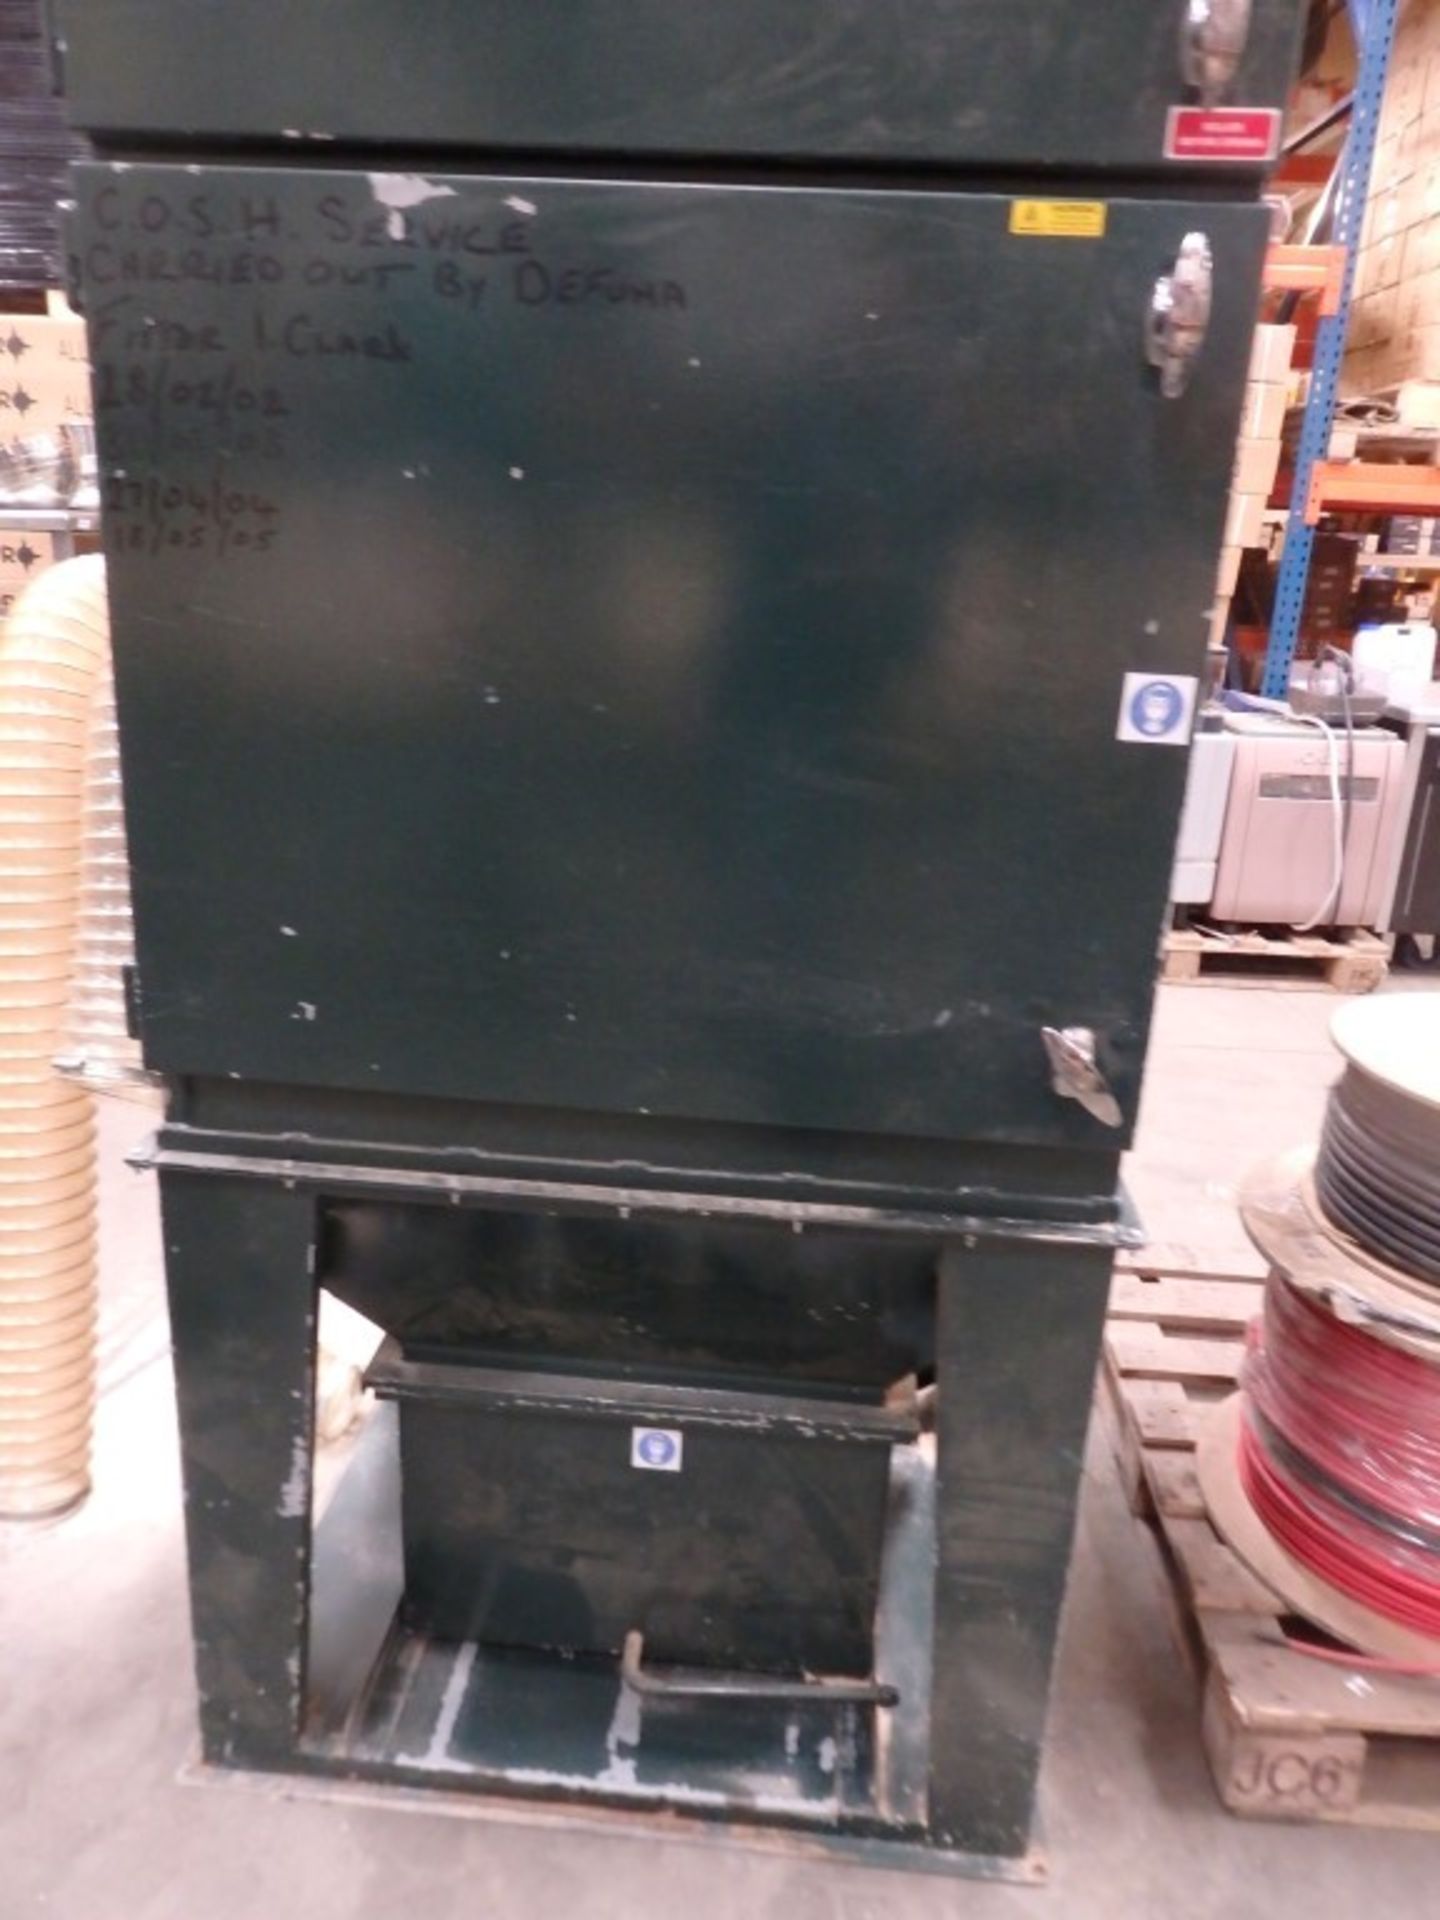 1 x Pefurma Dust Extractor - Compact self-contained unit - CL057 - Ref WPM098 - Location: Welwyn, - Image 7 of 13